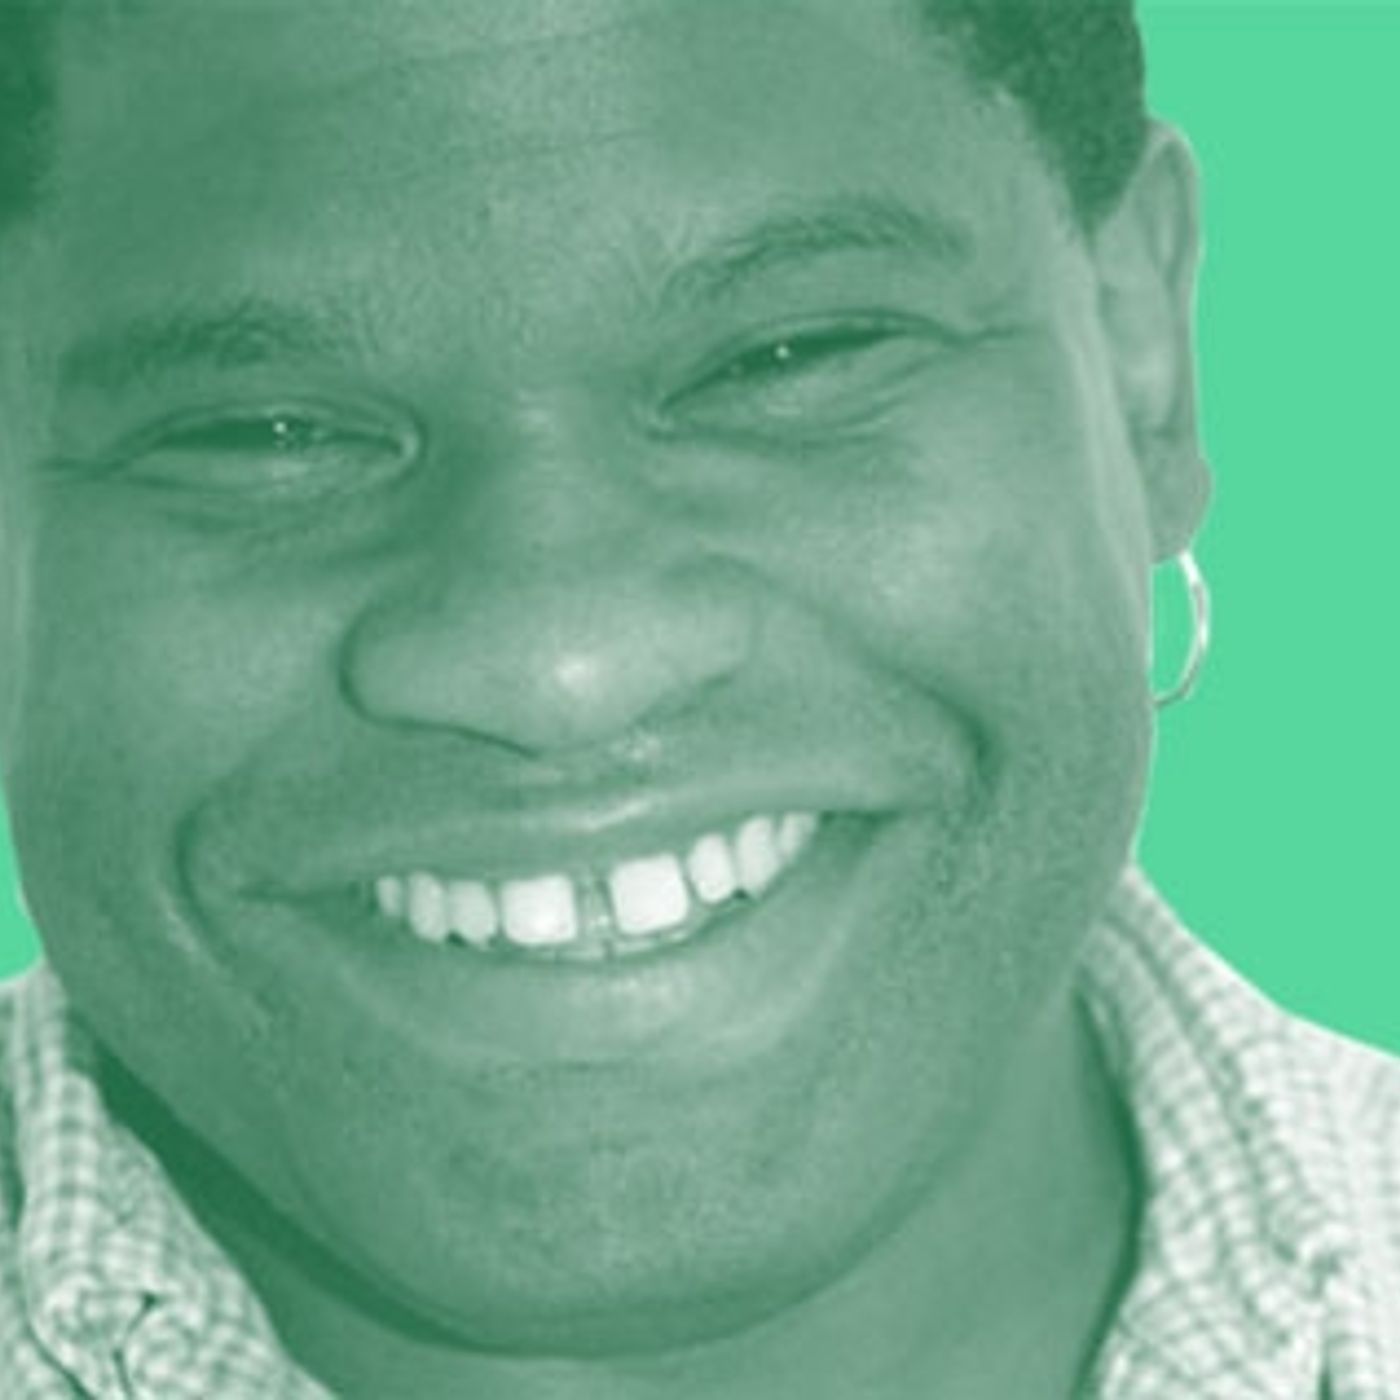 Podcast extra: Gary Younge on guns and America